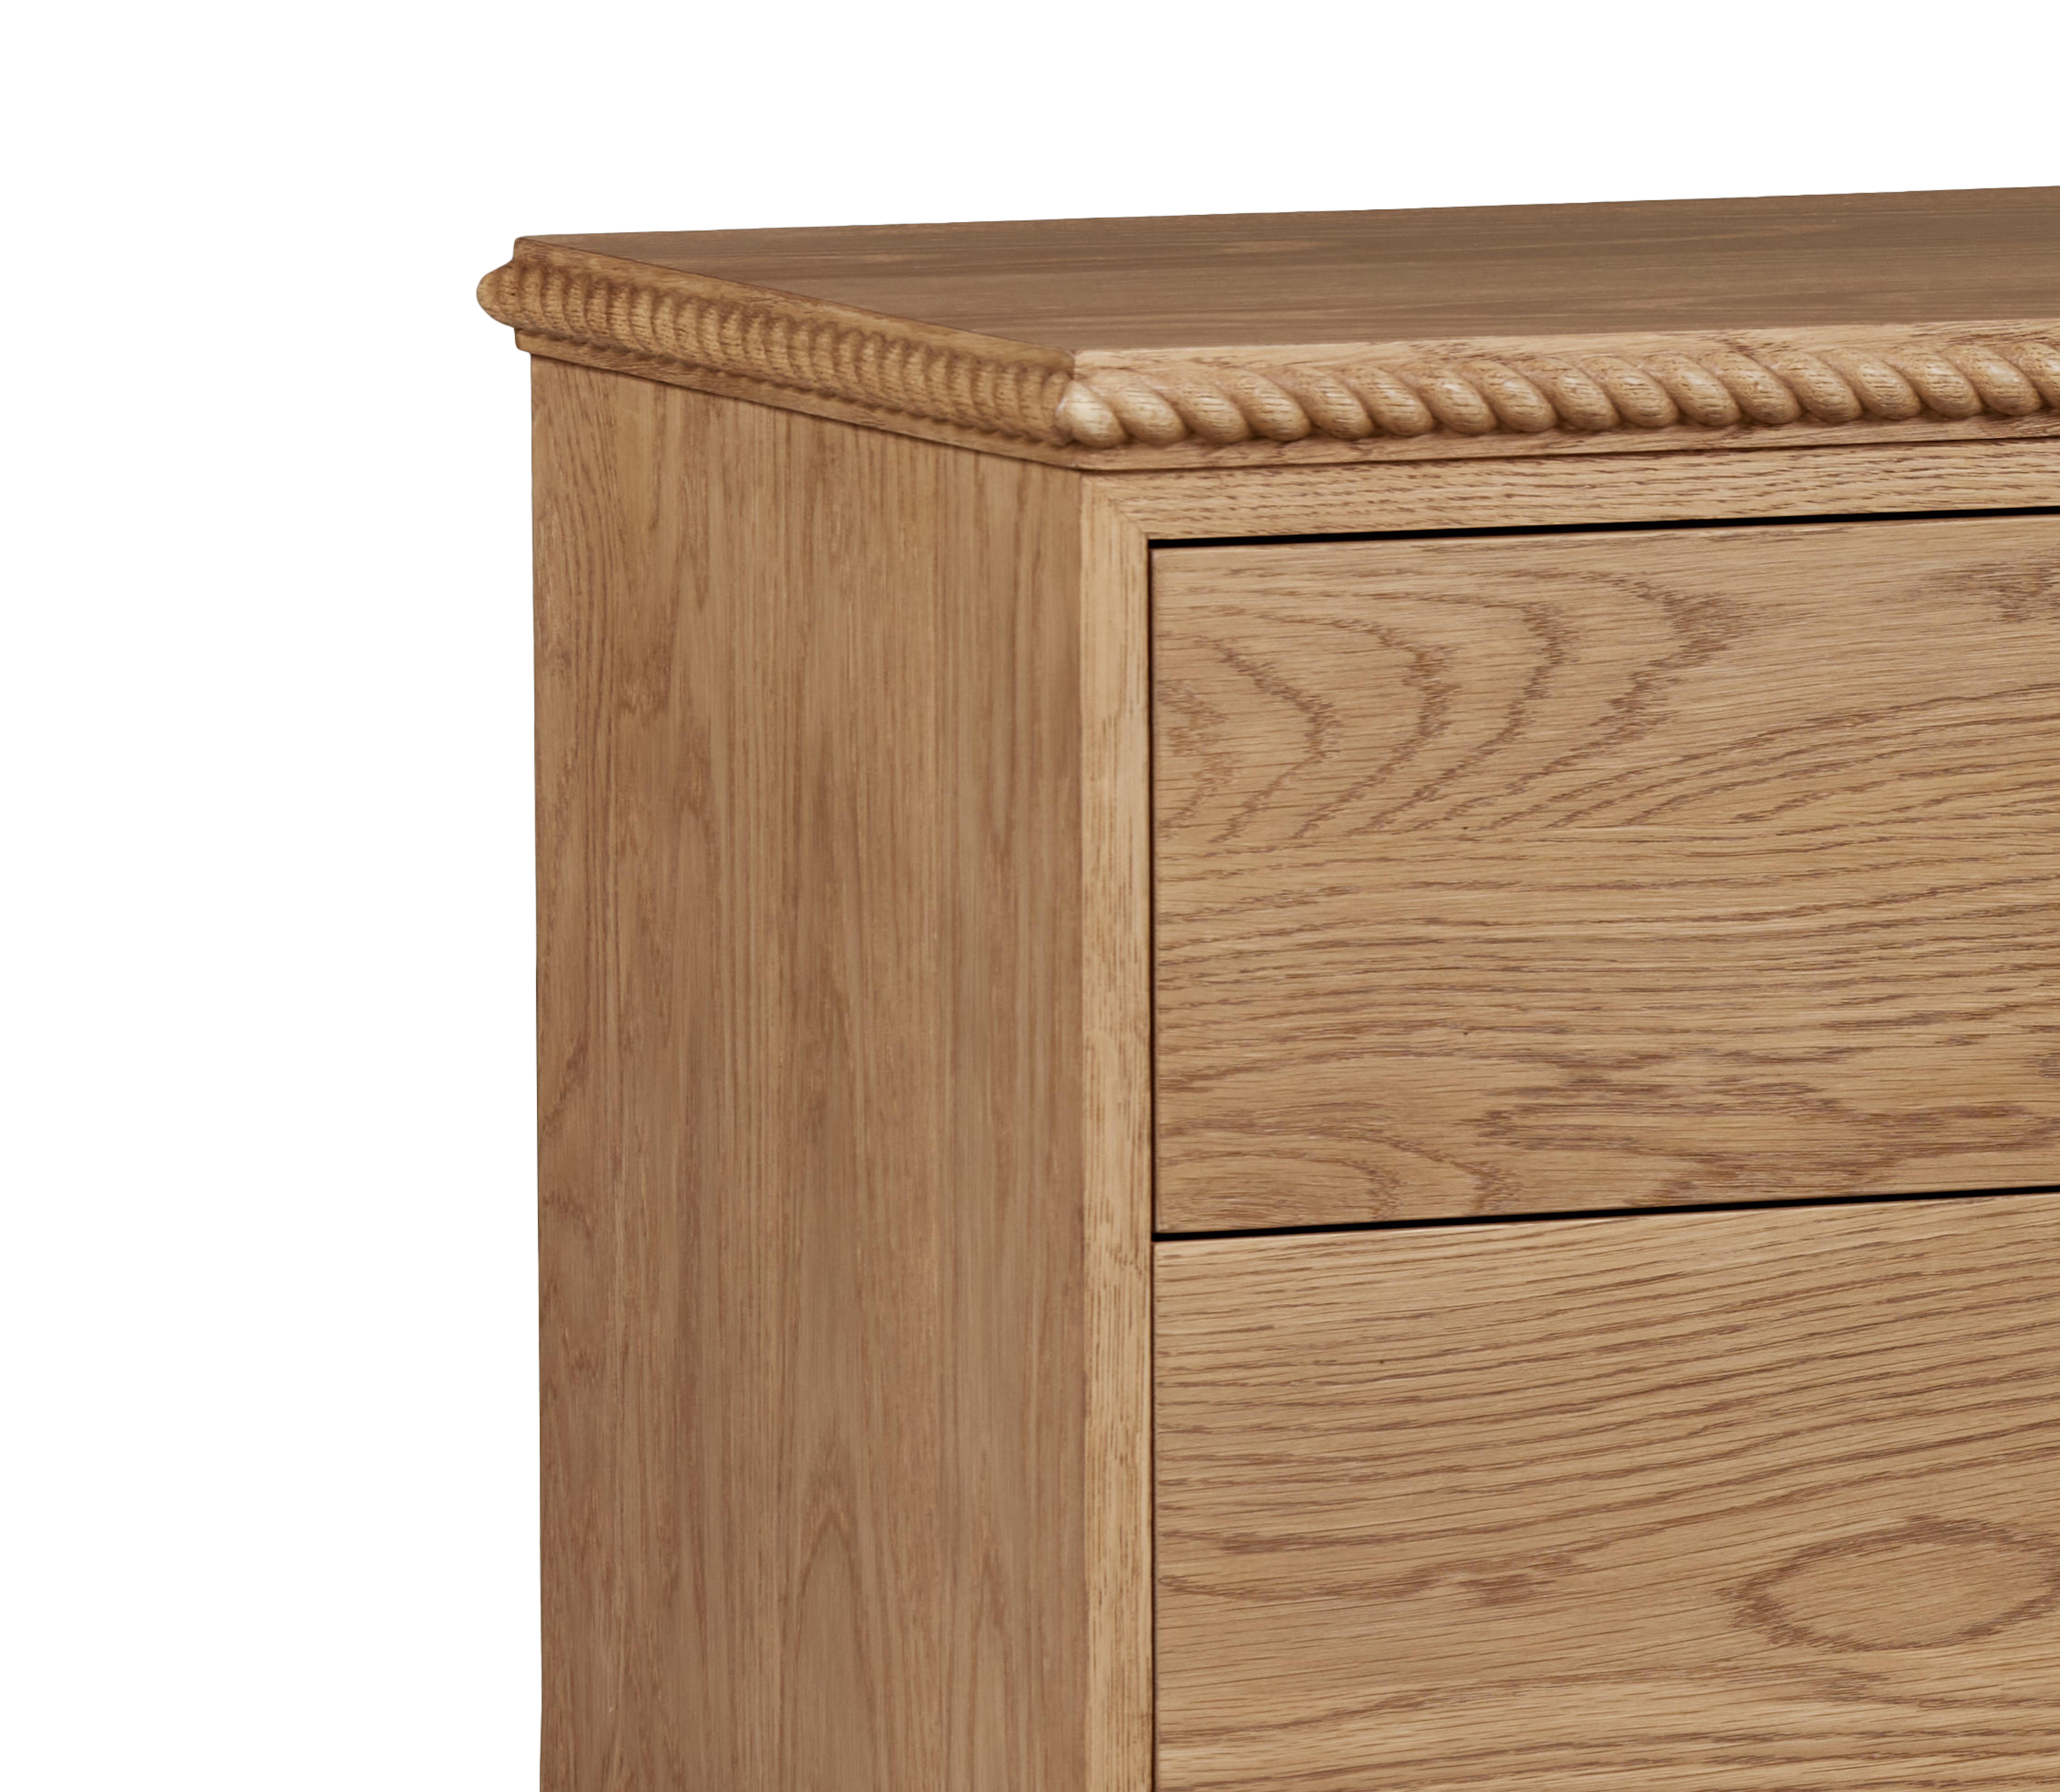 Pair of Rey Bedside Tables, in Summer Aged Oak, by August Abode In New Condition For Sale In Los Angeles, CA